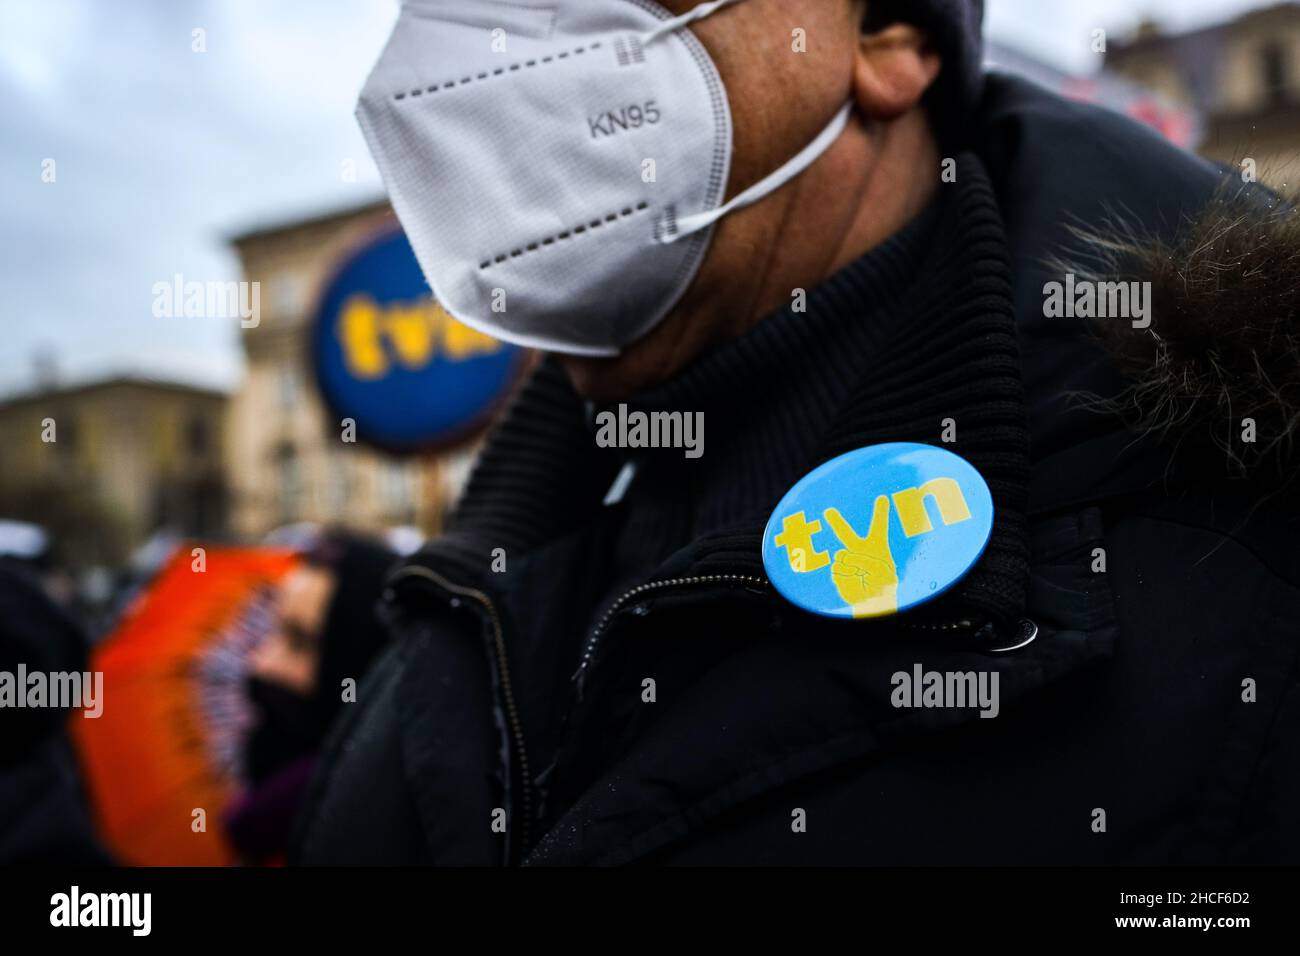 A badge with a logo of TVN broadcasting company and a 'victory' gesture is seen on a protester's coat.  Poland's parliament recently passed a controve Stock Photo